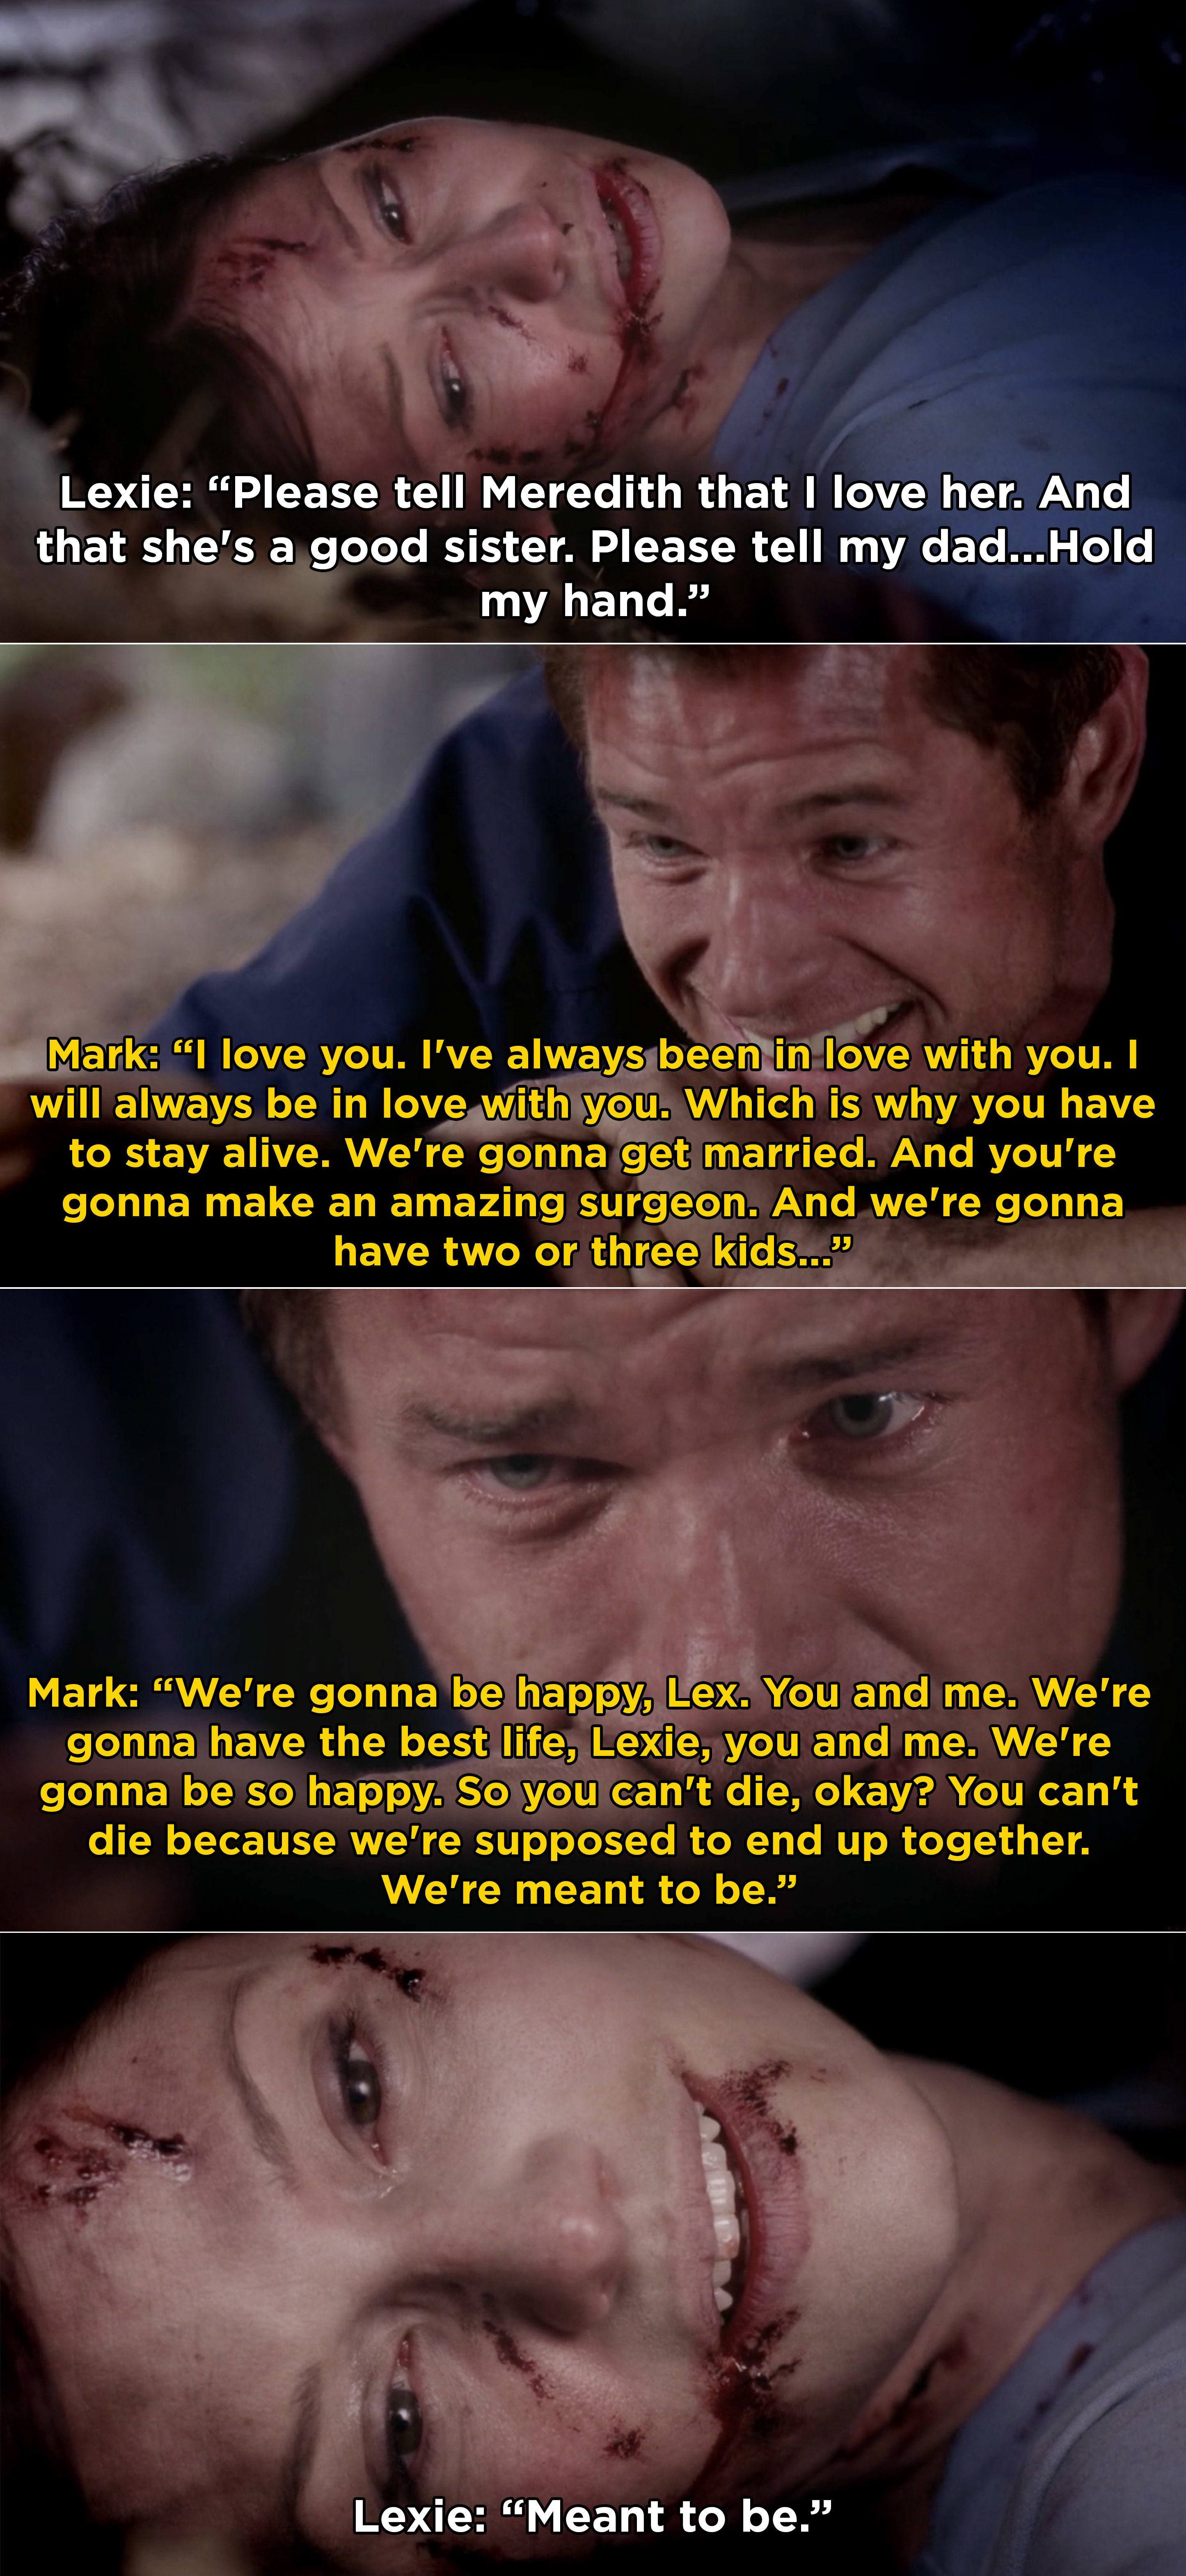 Mark telling Lexie they are meant to be before Lexie dies after the plane crash